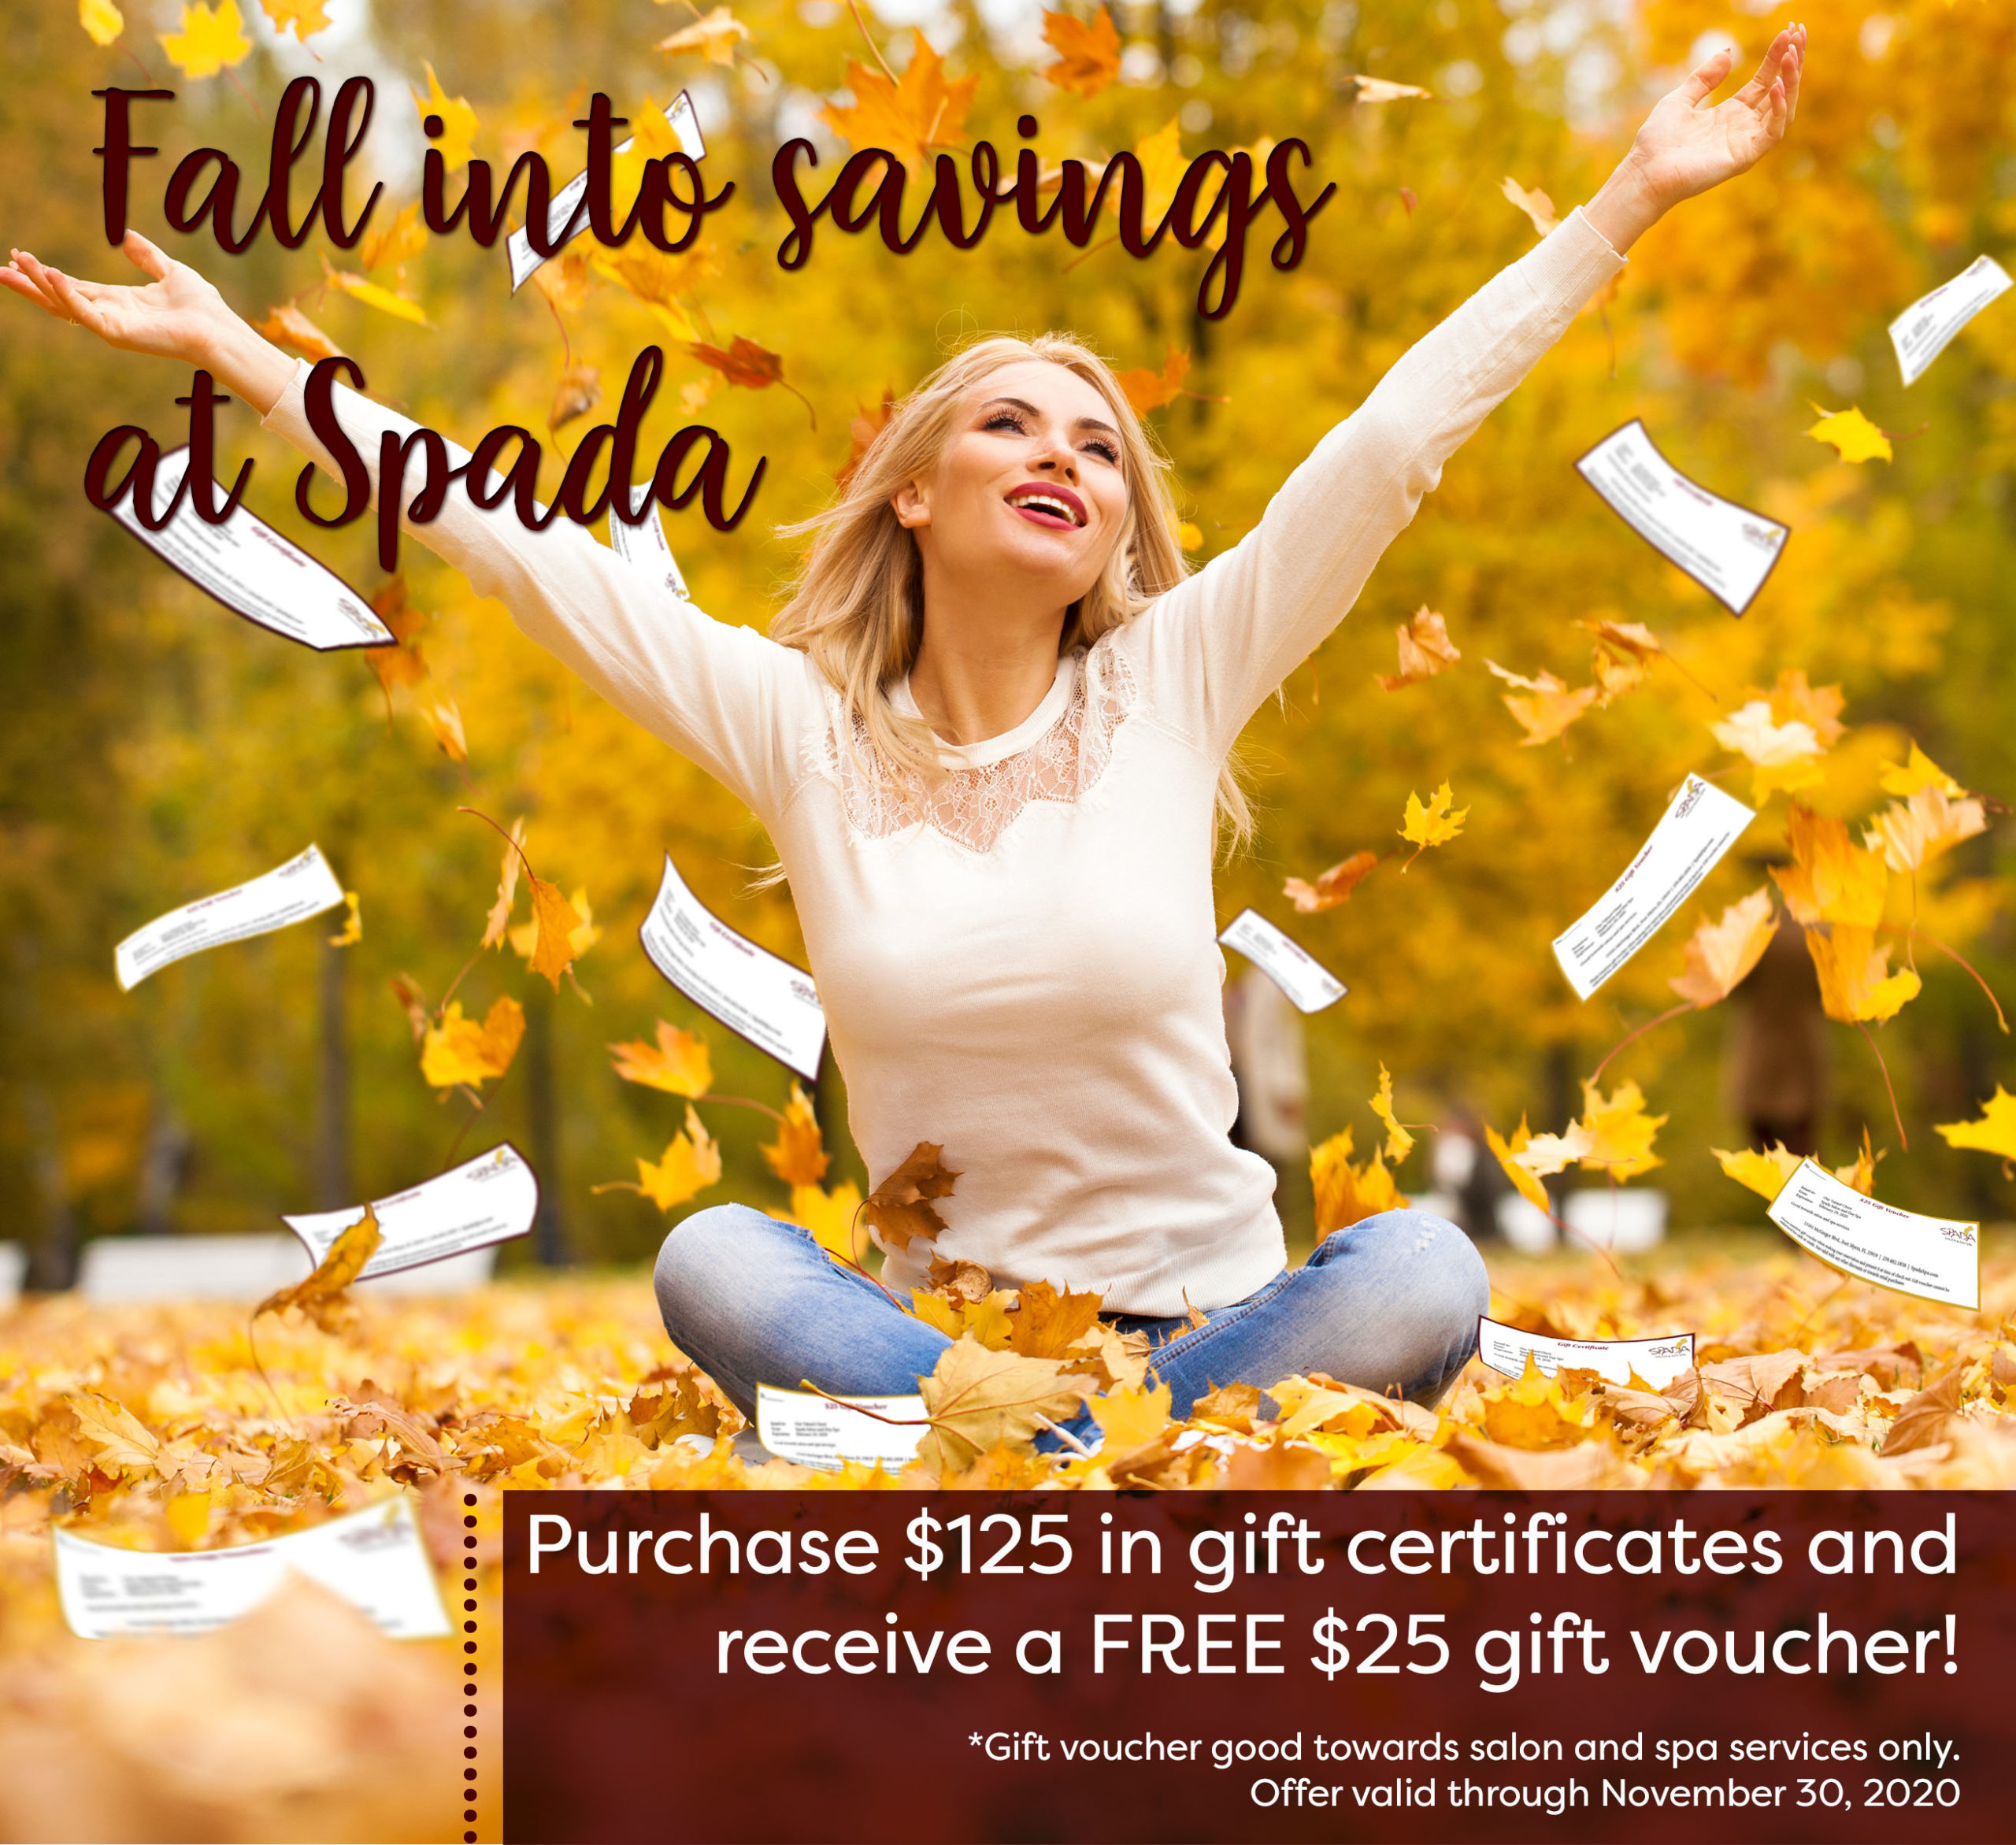 Fall into savings at Spada - Purchase $125 in gift certificates and receive a FREE $25 gift voucher! Gift voucher good towards salon and spa services only. Offer valid through November 30, 2020